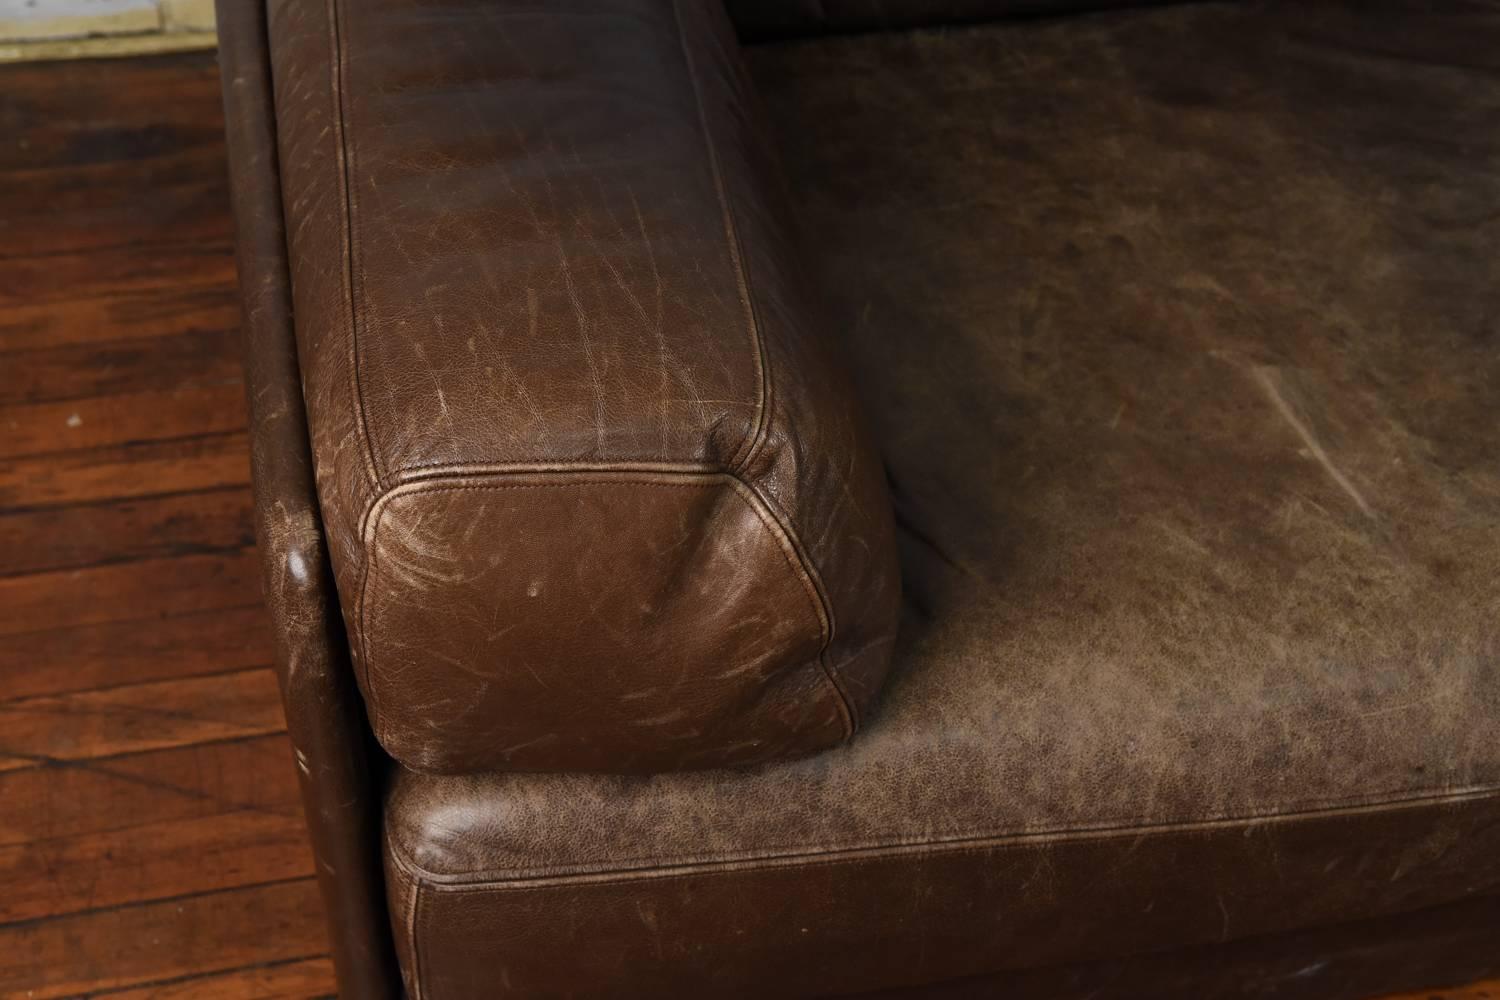 This sofa is made of two pieces which can be combined to make one loveseat, or can be separated to make two lounge chairs. The perfect piece for rearranging a room's layout for entertaining purposes. A great warm and perfectly distressed leather